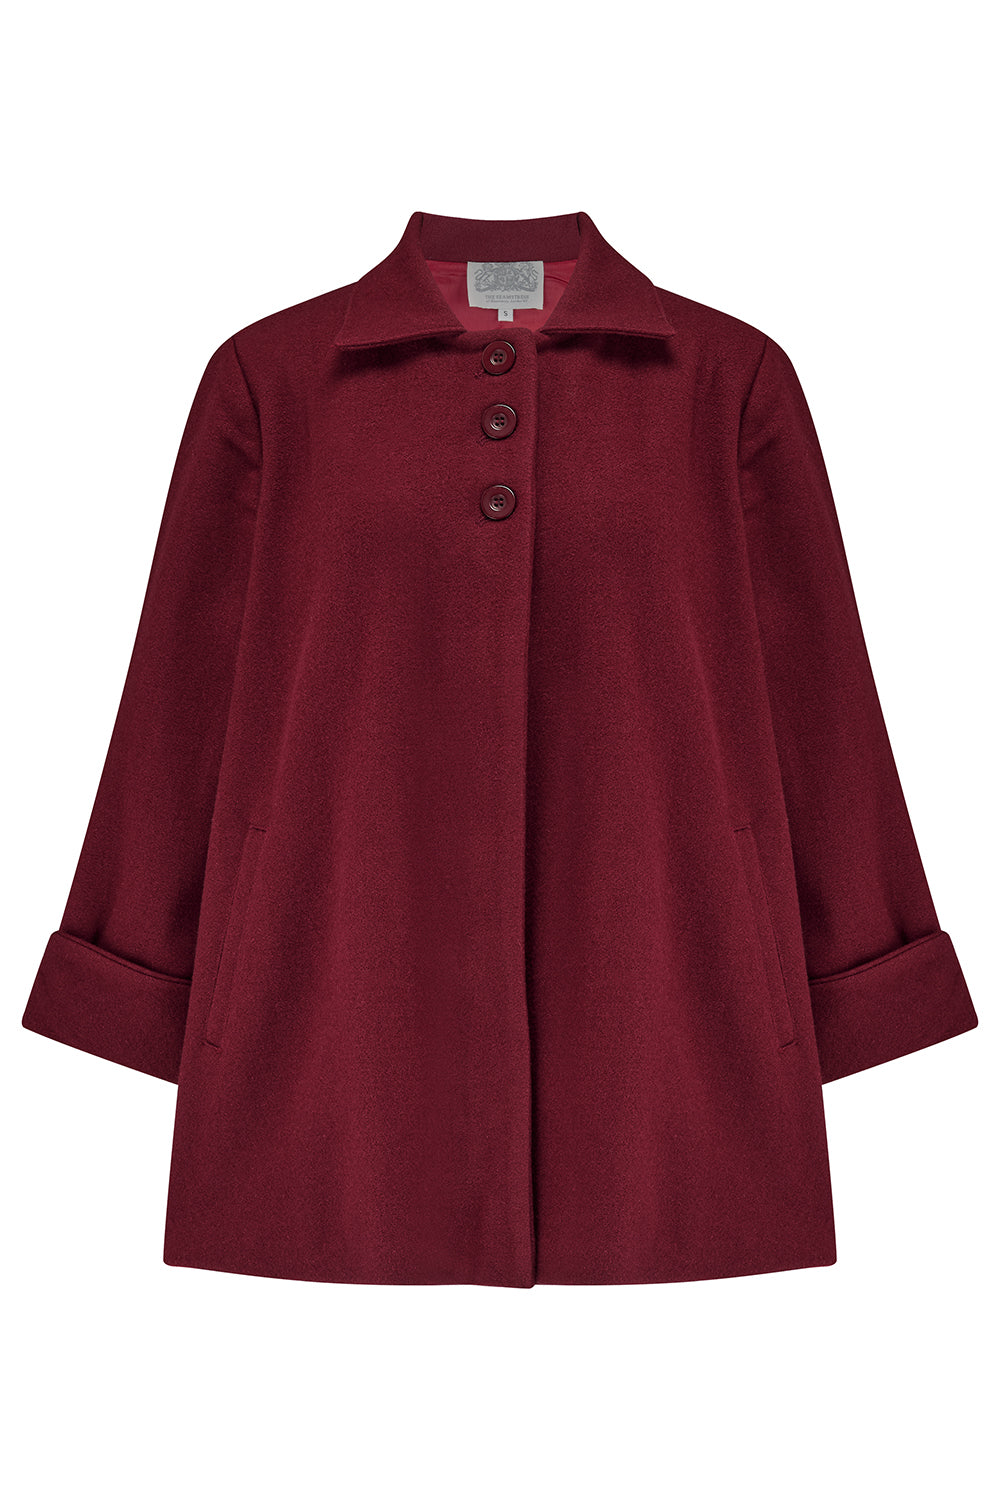 Swing Jacket in Wine, Vintage 1940s Cape Style Inspired Over Coat